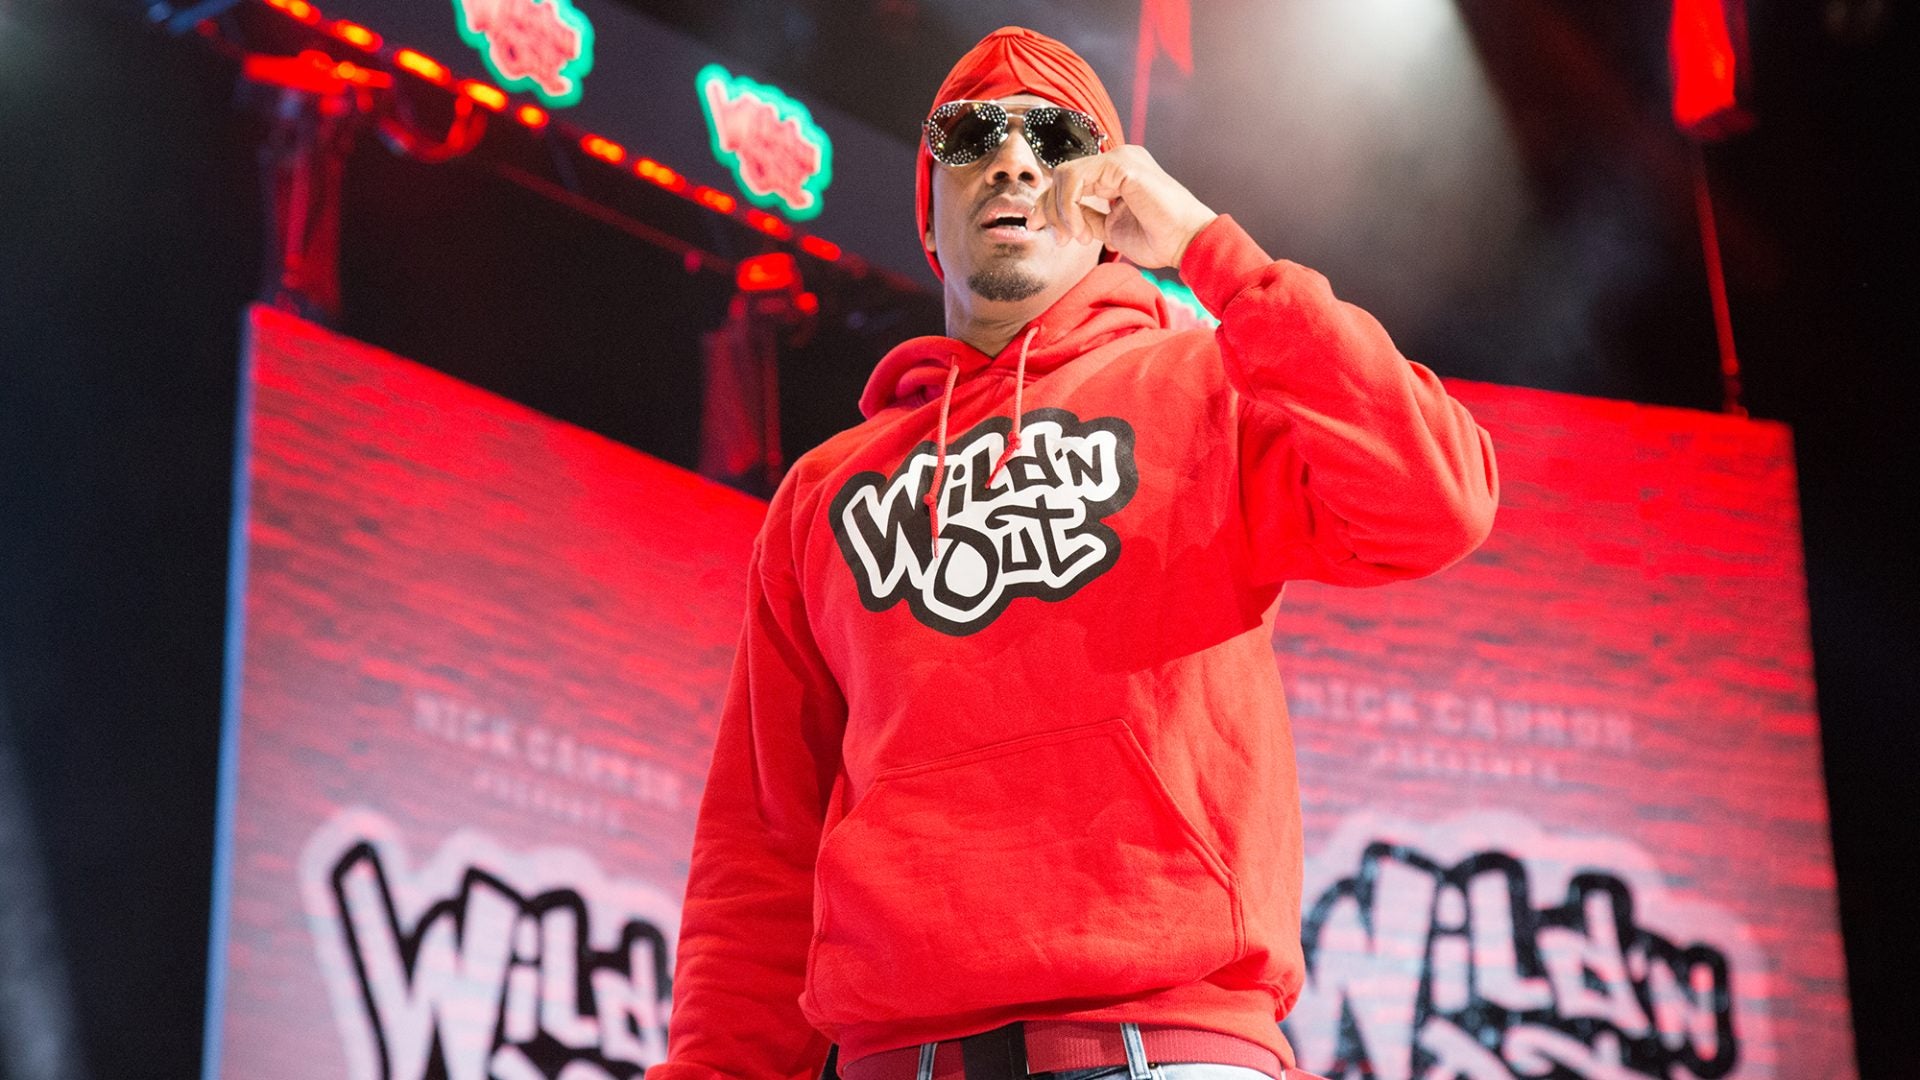 ‘Wild ‘N Out’s 20th Season: Nick Cannon On The Show’s Talent, Impact And Future